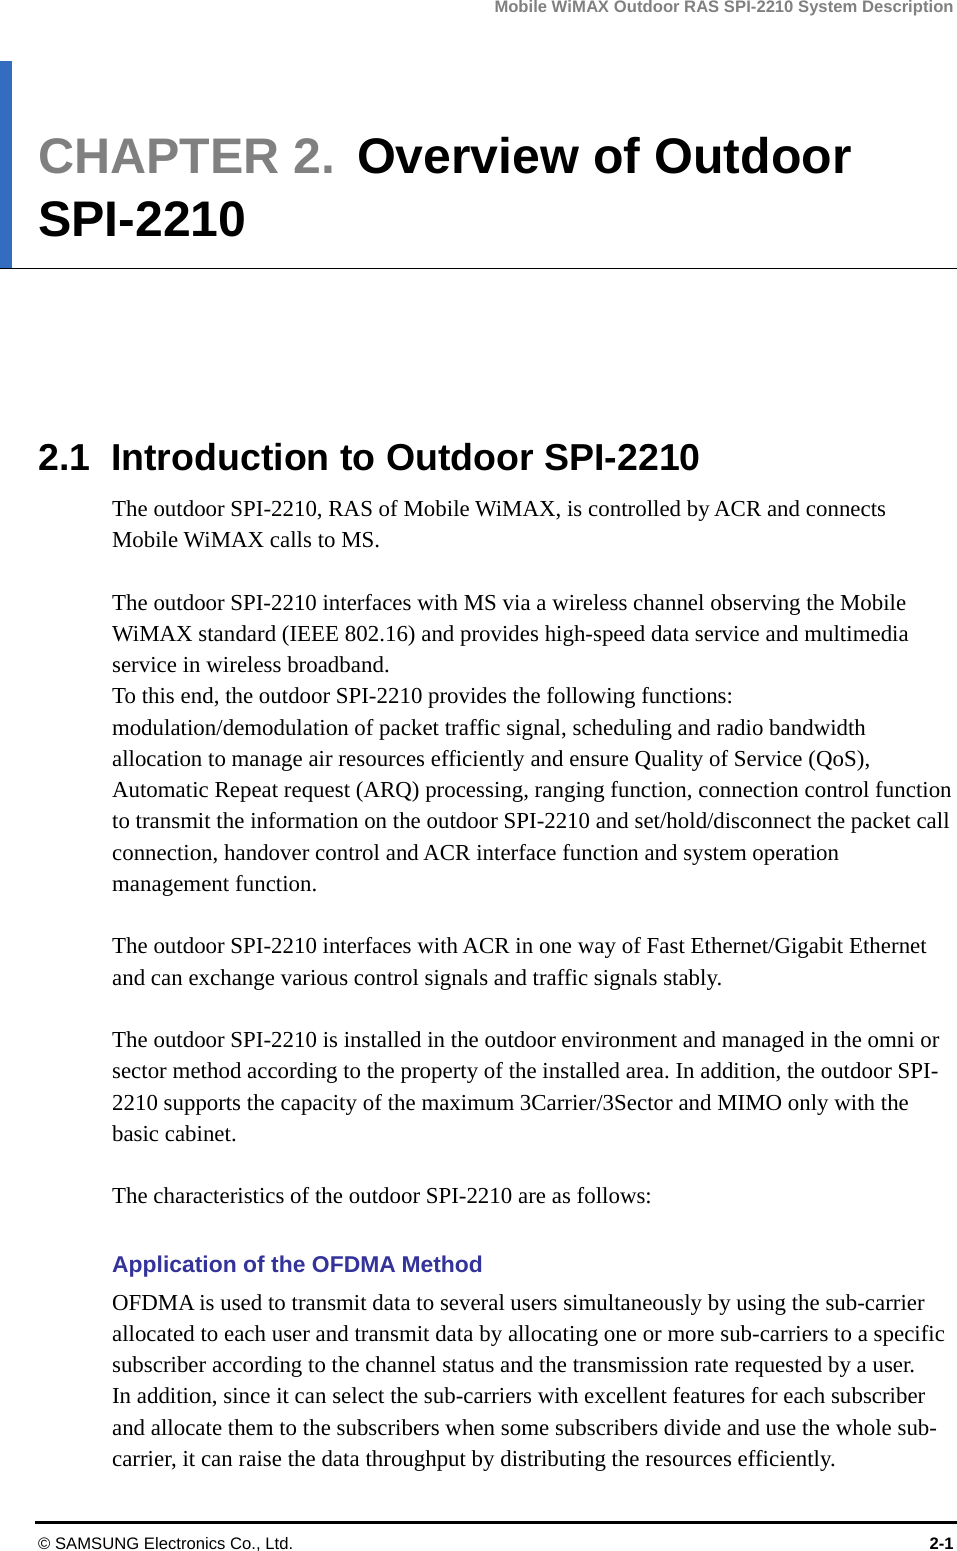 Mobile WiMAX Outdoor RAS SPI-2210 System Description © SAMSUNG Electronics Co., Ltd.  2-1 CHAPTER 2.  Overview of Outdoor SPI-2210      2.1  Introduction to Outdoor SPI-2210 The outdoor SPI-2210, RAS of Mobile WiMAX, is controlled by ACR and connects Mobile WiMAX calls to MS.  The outdoor SPI-2210 interfaces with MS via a wireless channel observing the Mobile WiMAX standard (IEEE 802.16) and provides high-speed data service and multimedia service in wireless broadband. To this end, the outdoor SPI-2210 provides the following functions: modulation/demodulation of packet traffic signal, scheduling and radio bandwidth allocation to manage air resources efficiently and ensure Quality of Service (QoS), Automatic Repeat request (ARQ) processing, ranging function, connection control function to transmit the information on the outdoor SPI-2210 and set/hold/disconnect the packet call connection, handover control and ACR interface function and system operation management function.    The outdoor SPI-2210 interfaces with ACR in one way of Fast Ethernet/Gigabit Ethernet and can exchange various control signals and traffic signals stably.  The outdoor SPI-2210 is installed in the outdoor environment and managed in the omni or sector method according to the property of the installed area. In addition, the outdoor SPI-2210 supports the capacity of the maximum 3Carrier/3Sector and MIMO only with the basic cabinet.  The characteristics of the outdoor SPI-2210 are as follows:  Application of the OFDMA Method OFDMA is used to transmit data to several users simultaneously by using the sub-carrier allocated to each user and transmit data by allocating one or more sub-carriers to a specific subscriber according to the channel status and the transmission rate requested by a user.   In addition, since it can select the sub-carriers with excellent features for each subscriber and allocate them to the subscribers when some subscribers divide and use the whole sub-carrier, it can raise the data throughput by distributing the resources efficiently. 